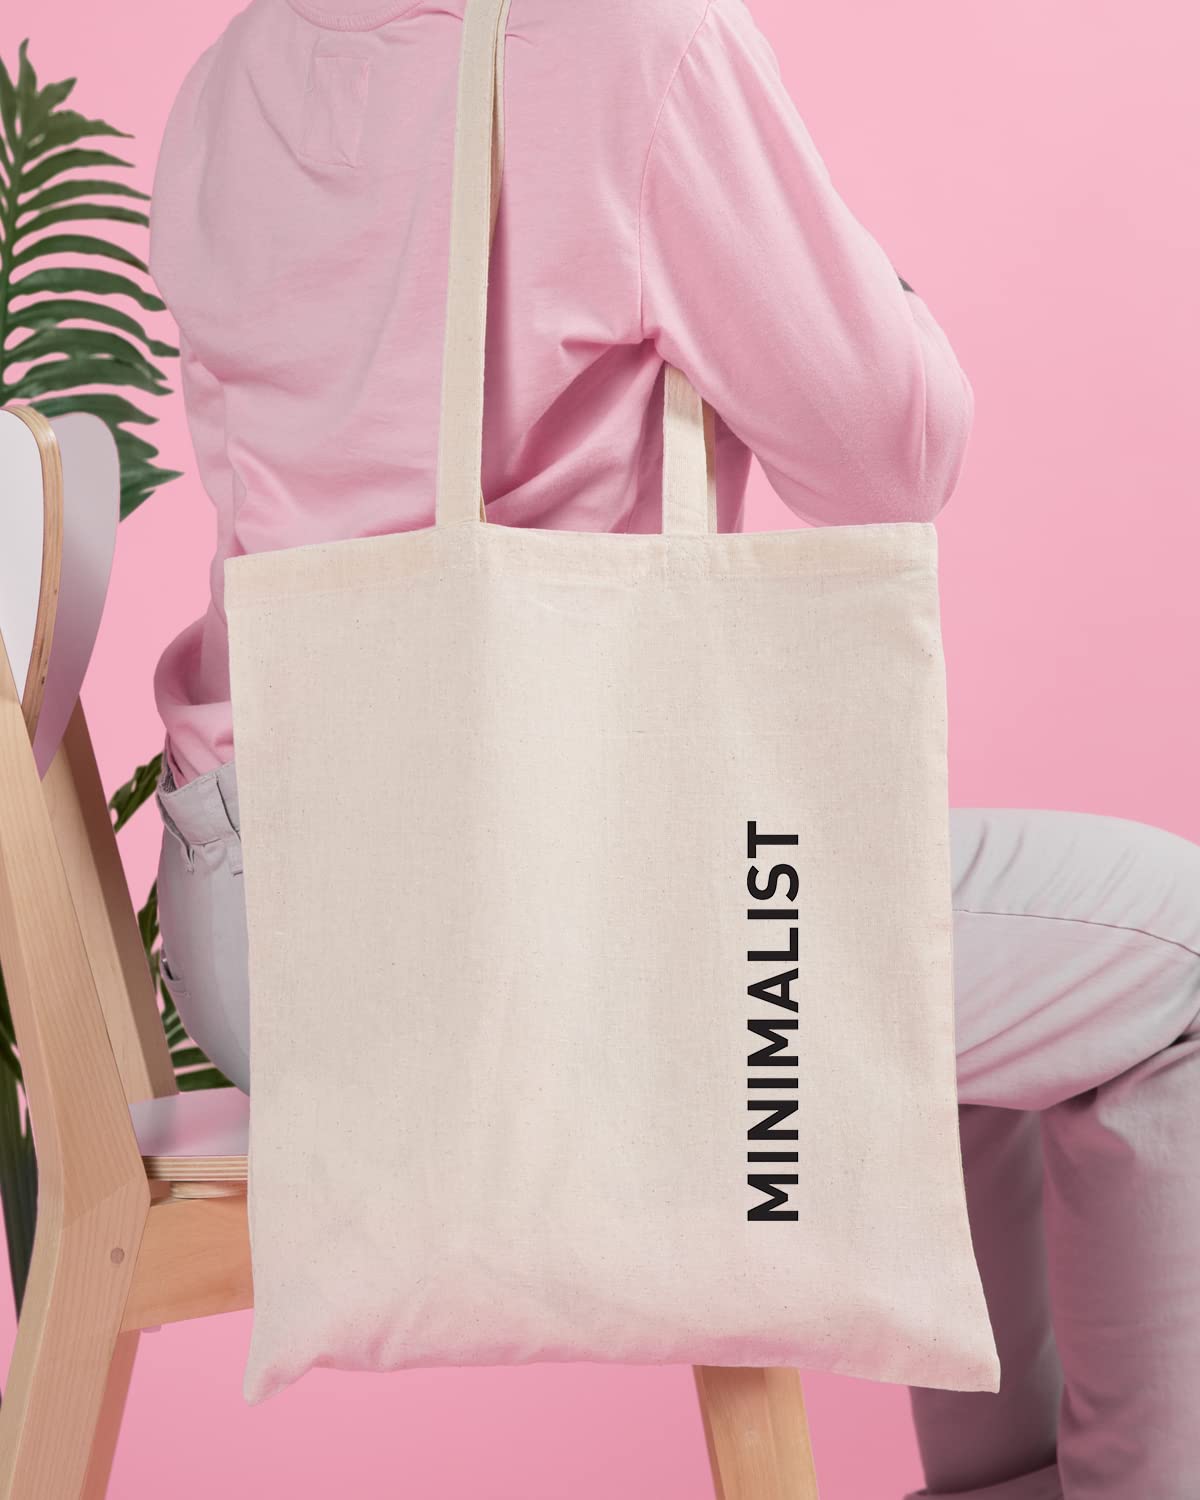 The Pink Magnet Minimalist Tote Bag - Canvas Tote Bag for Women | Printed Multipurpose Cotton Bags | Cute Hand Bag for Girls | Best for College, Travel, Grocery | Reusable Shopping Bag | Eco-Friendly Tote Bag